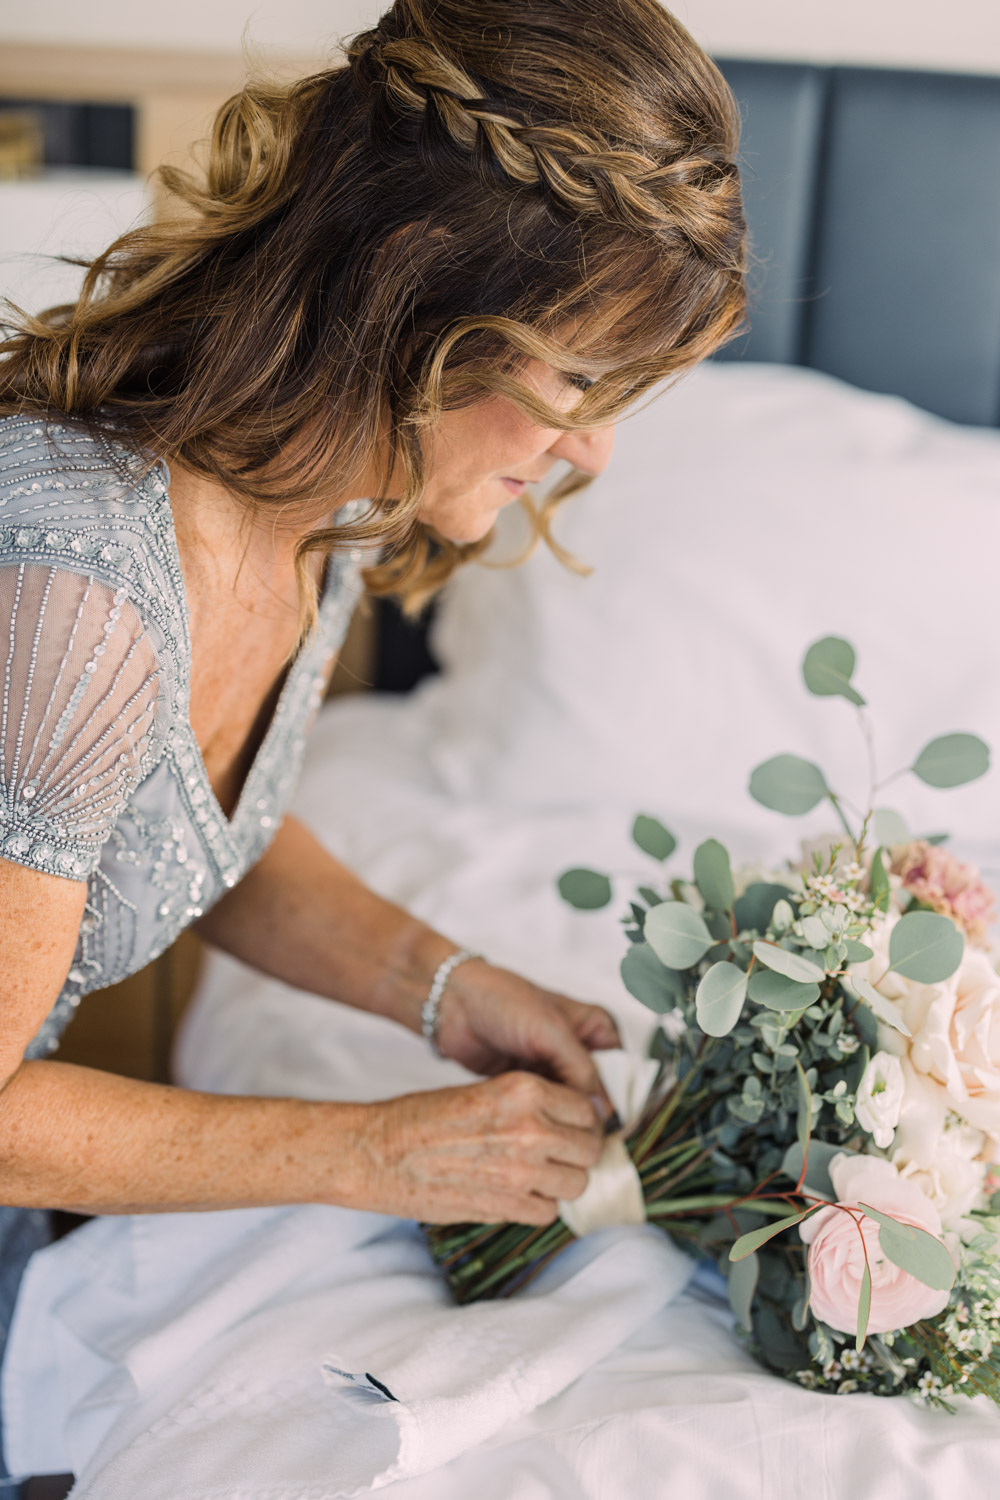 A bride's mother fastens a broach on a bridal bouquet.